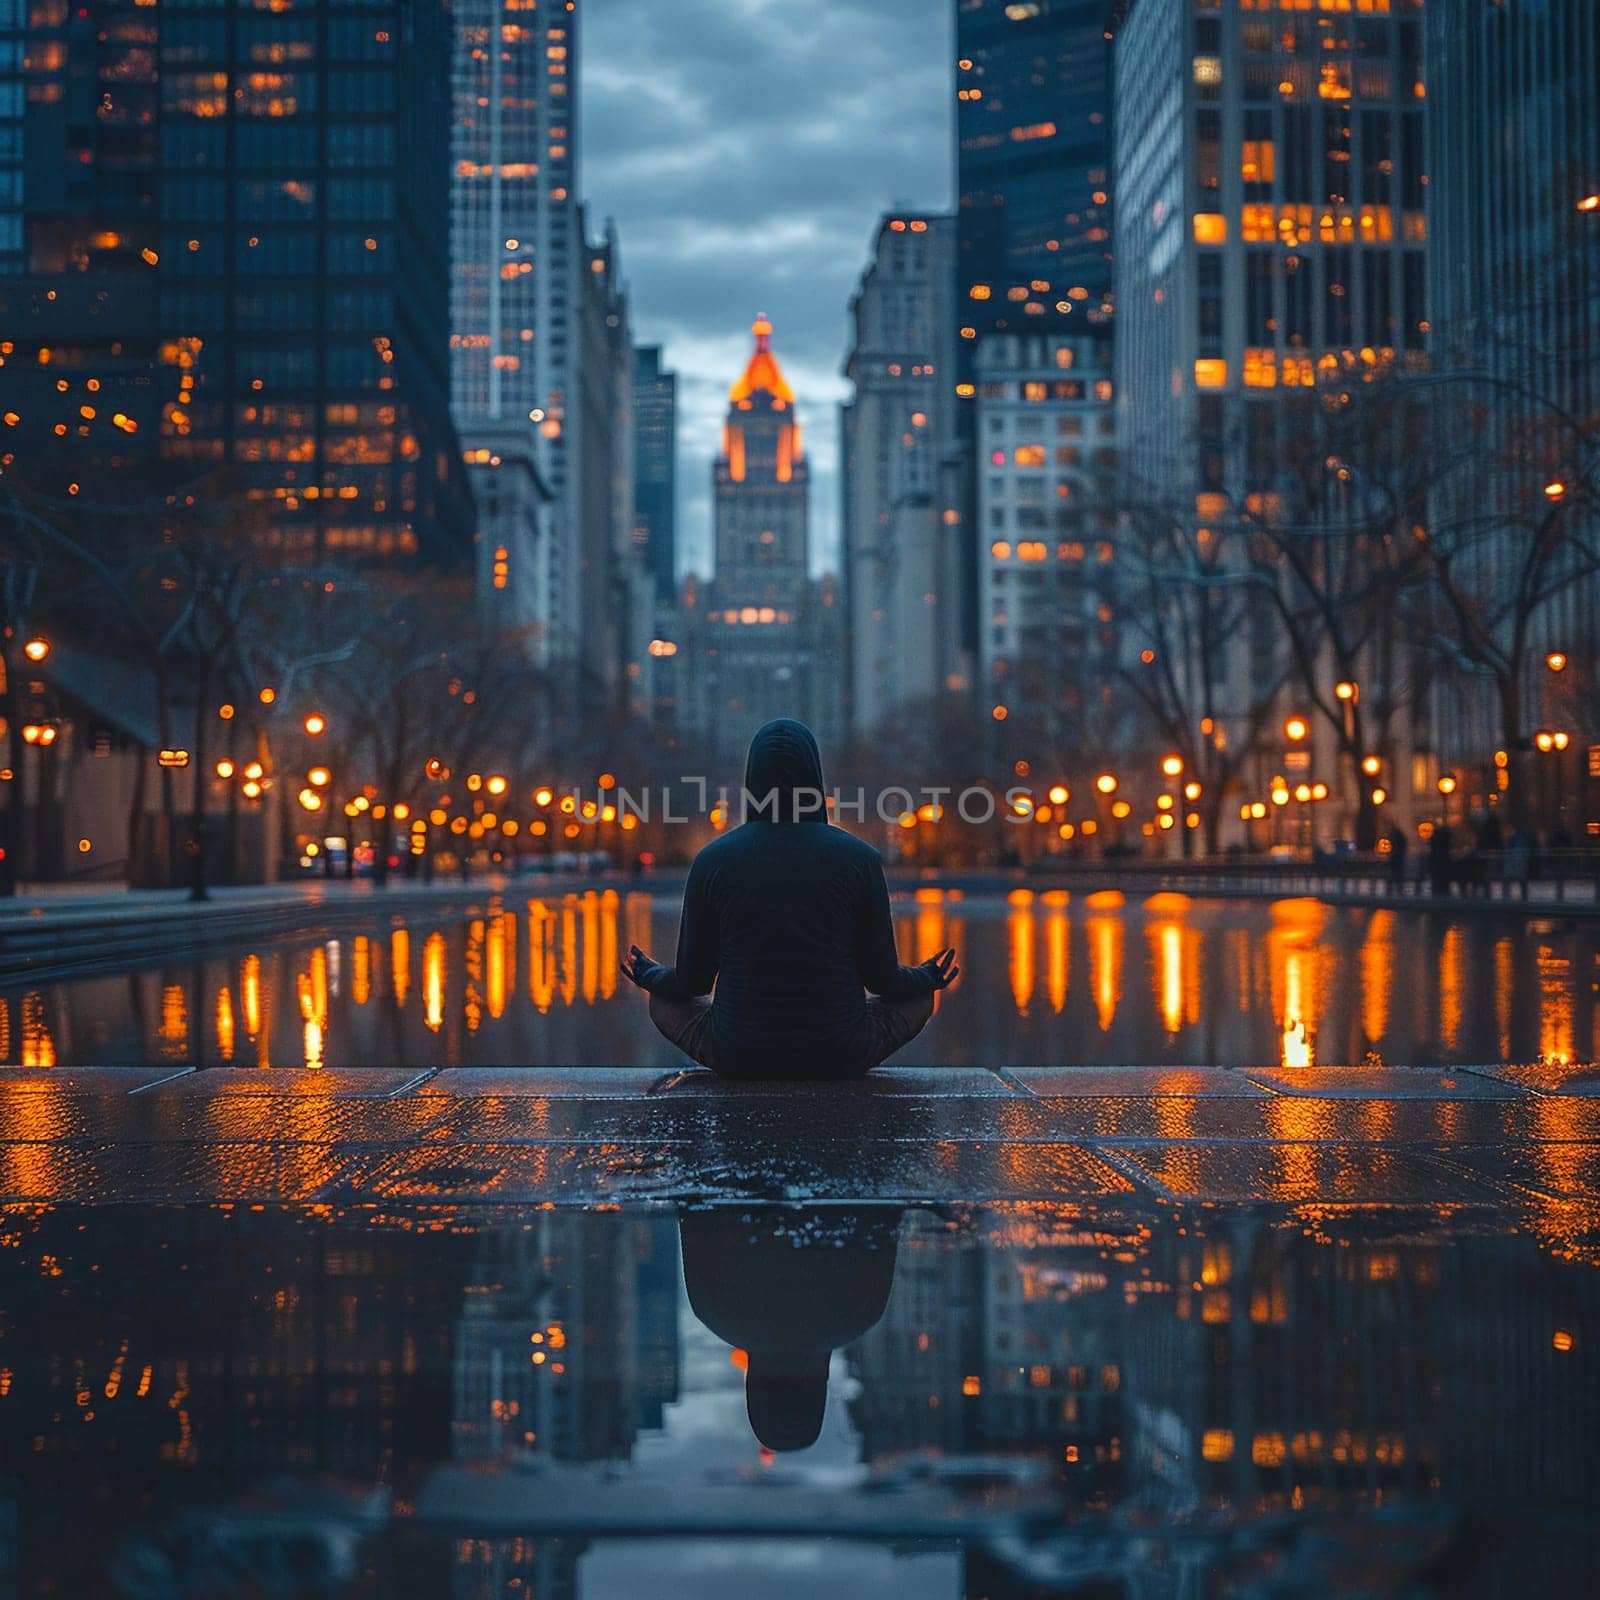 Conceptual photo of person meditating in urban setting to represent World Sleep Day.